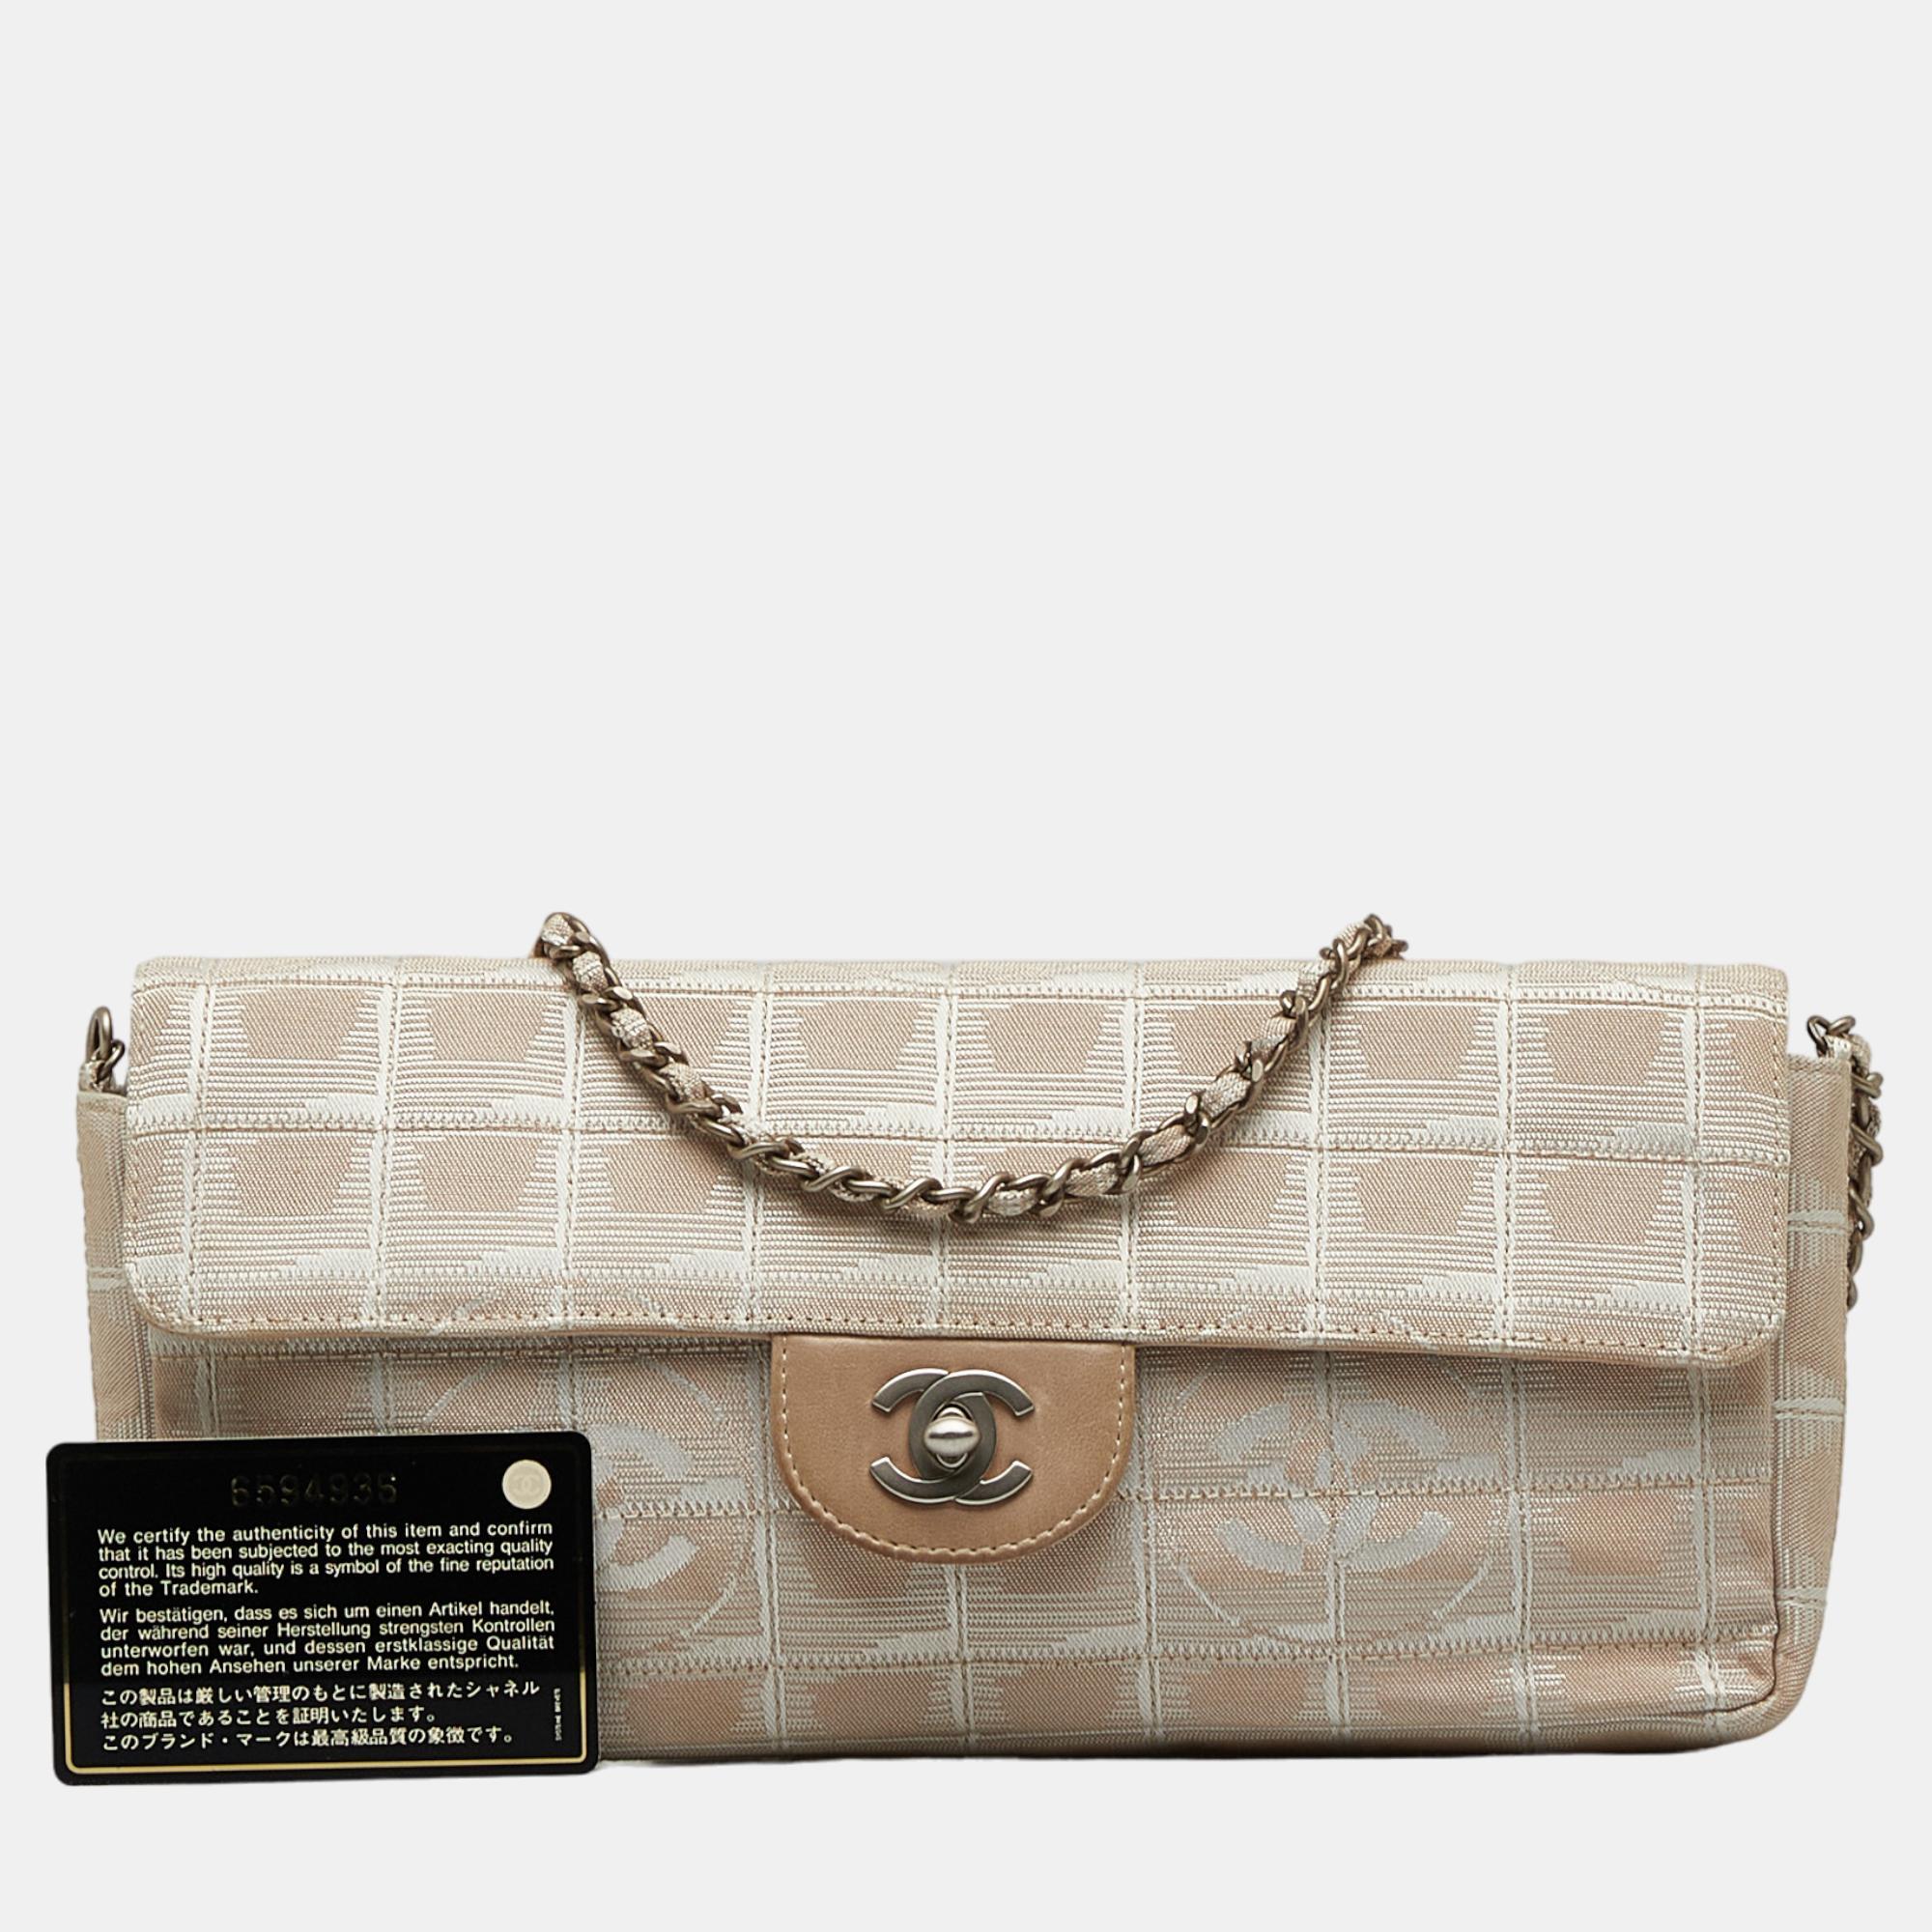 Chanel Beige New Travel Line East West Flap